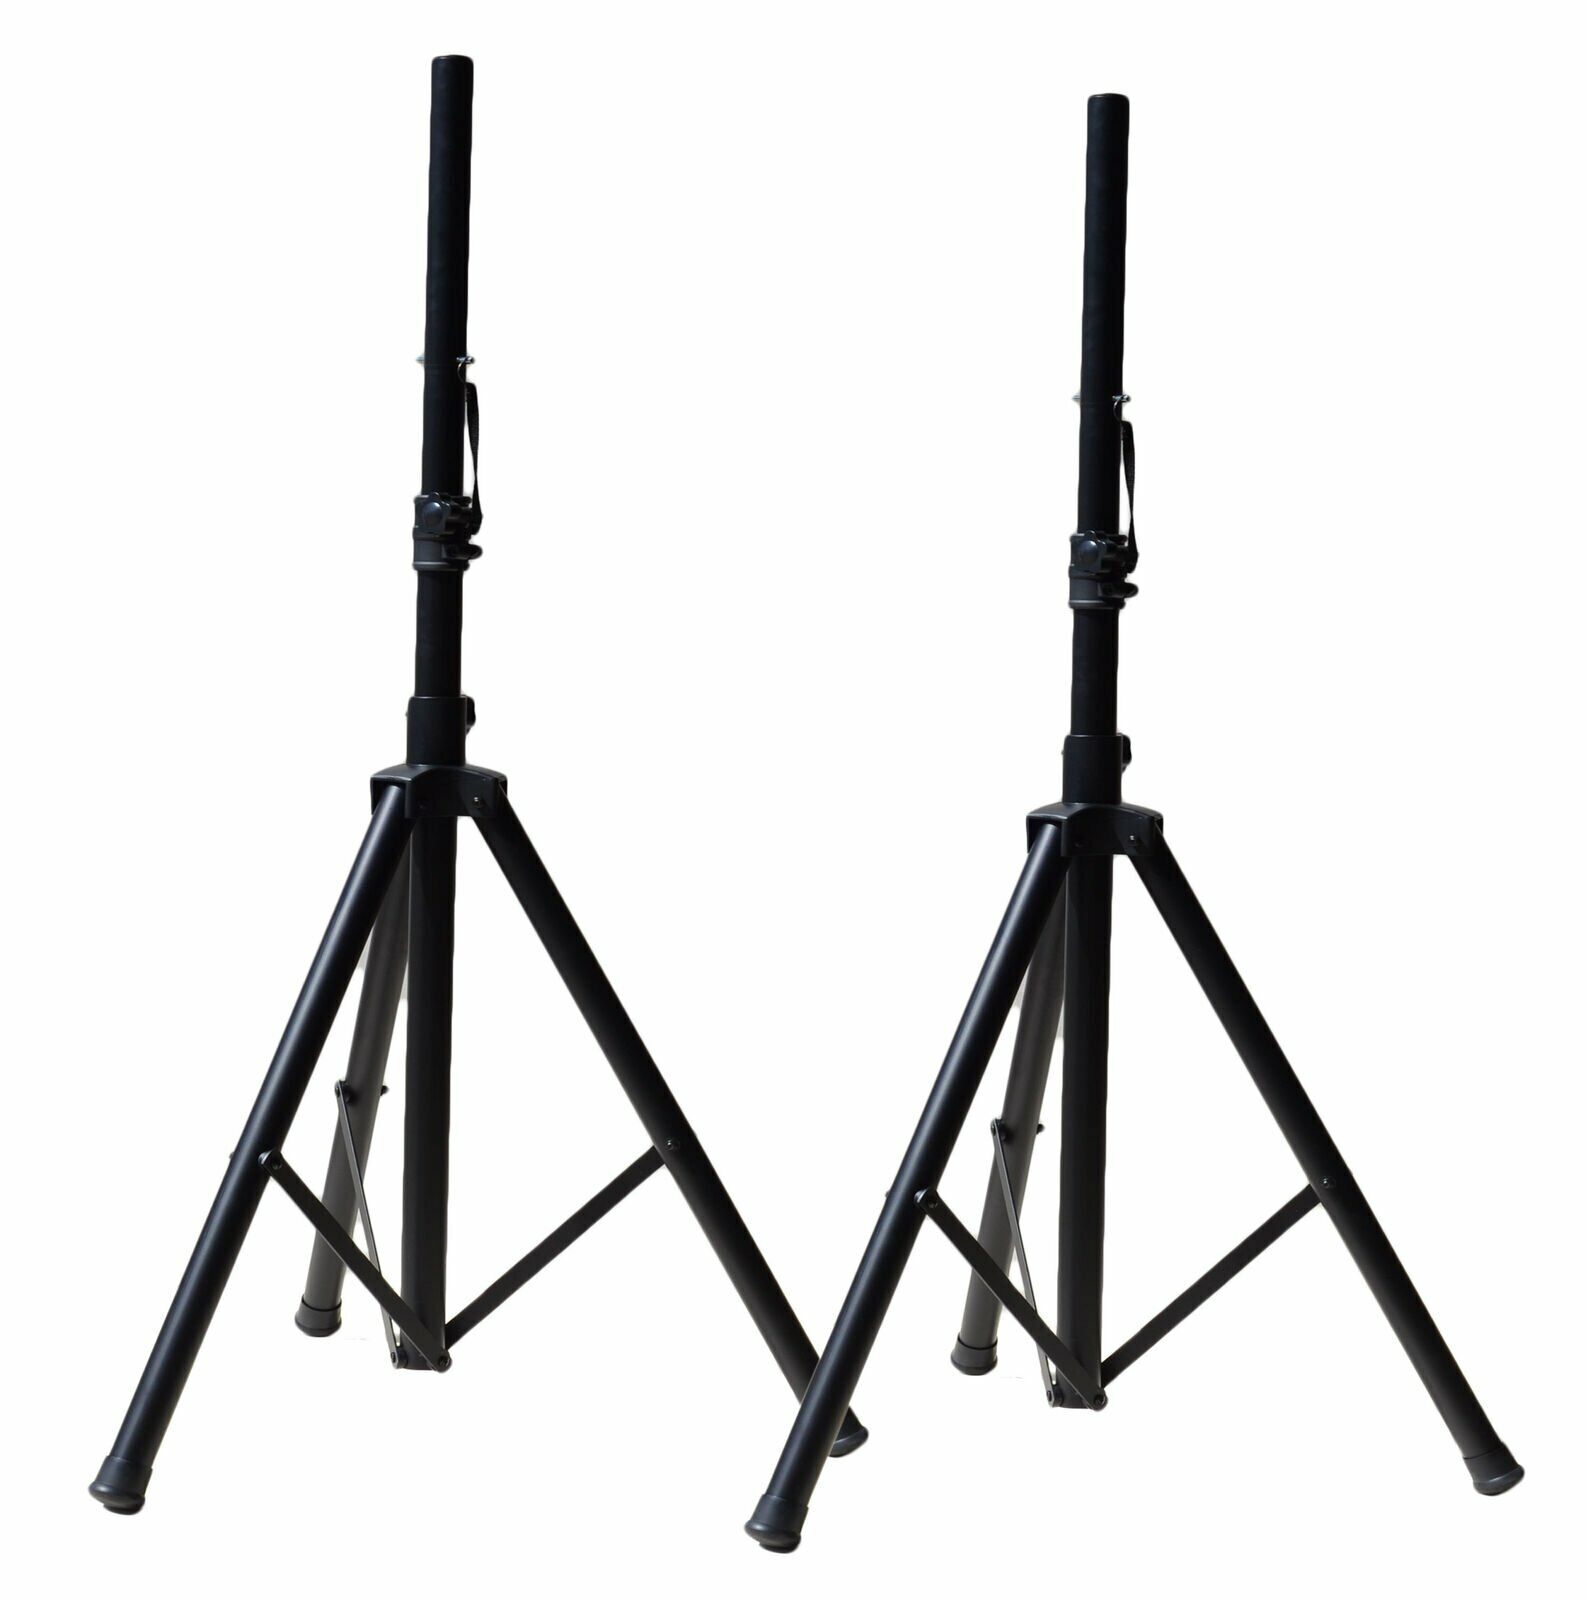 Pair of Ignite Pro Tripod DJ PA Speaker Stands Adjustable Height Stand